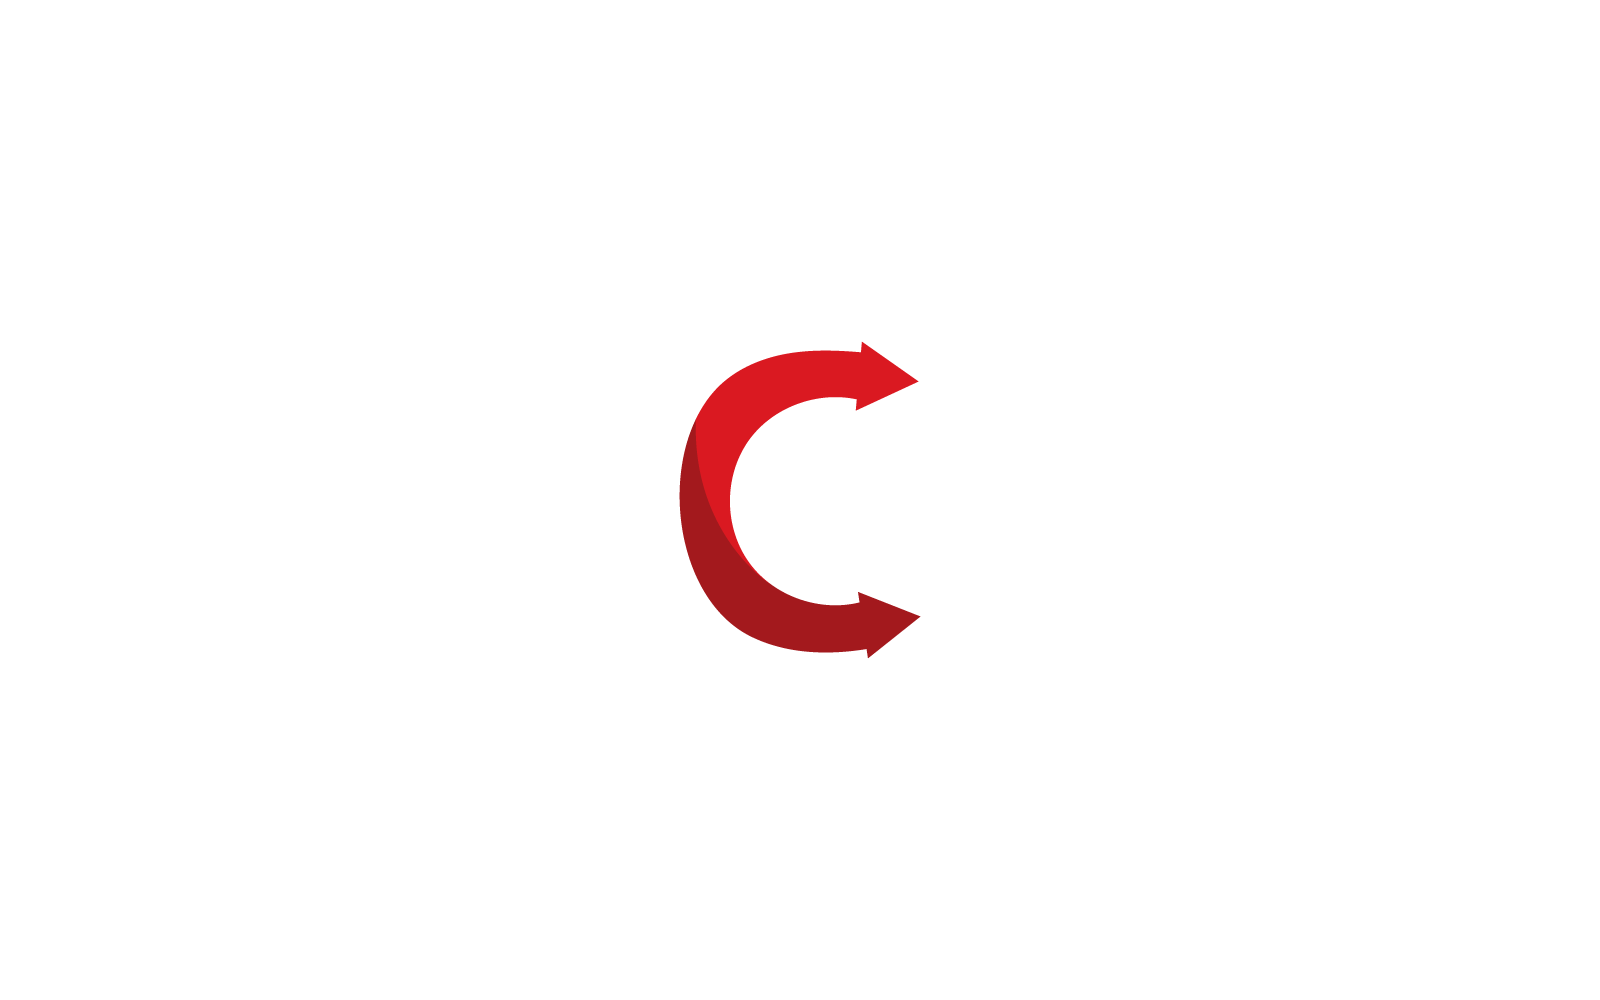 C Initial letter with arrow design illustration